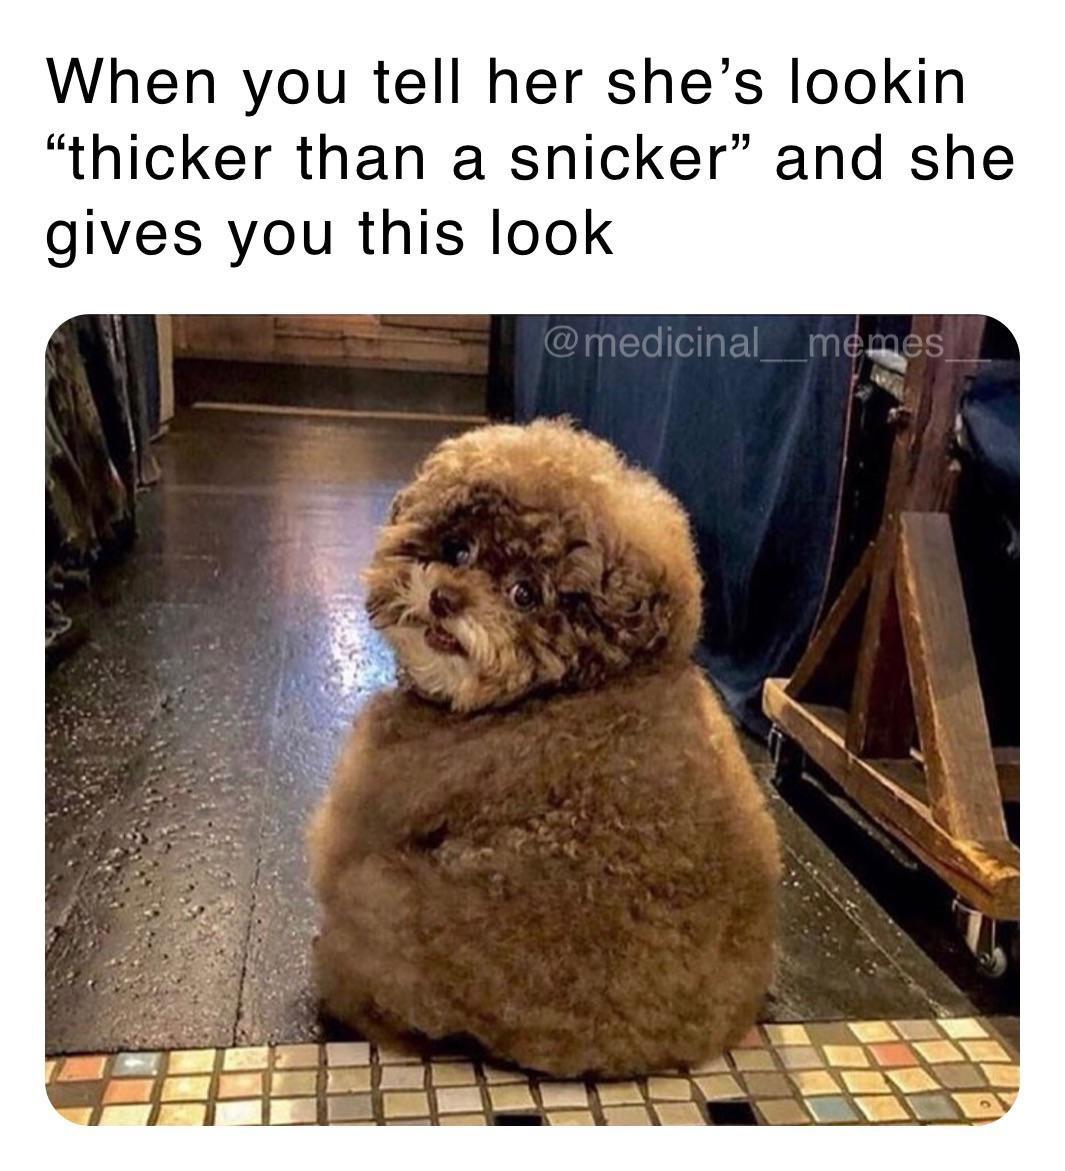 kokoro poodle - When you tell her she's lookin "thicker than a snicker" and she gives you this look